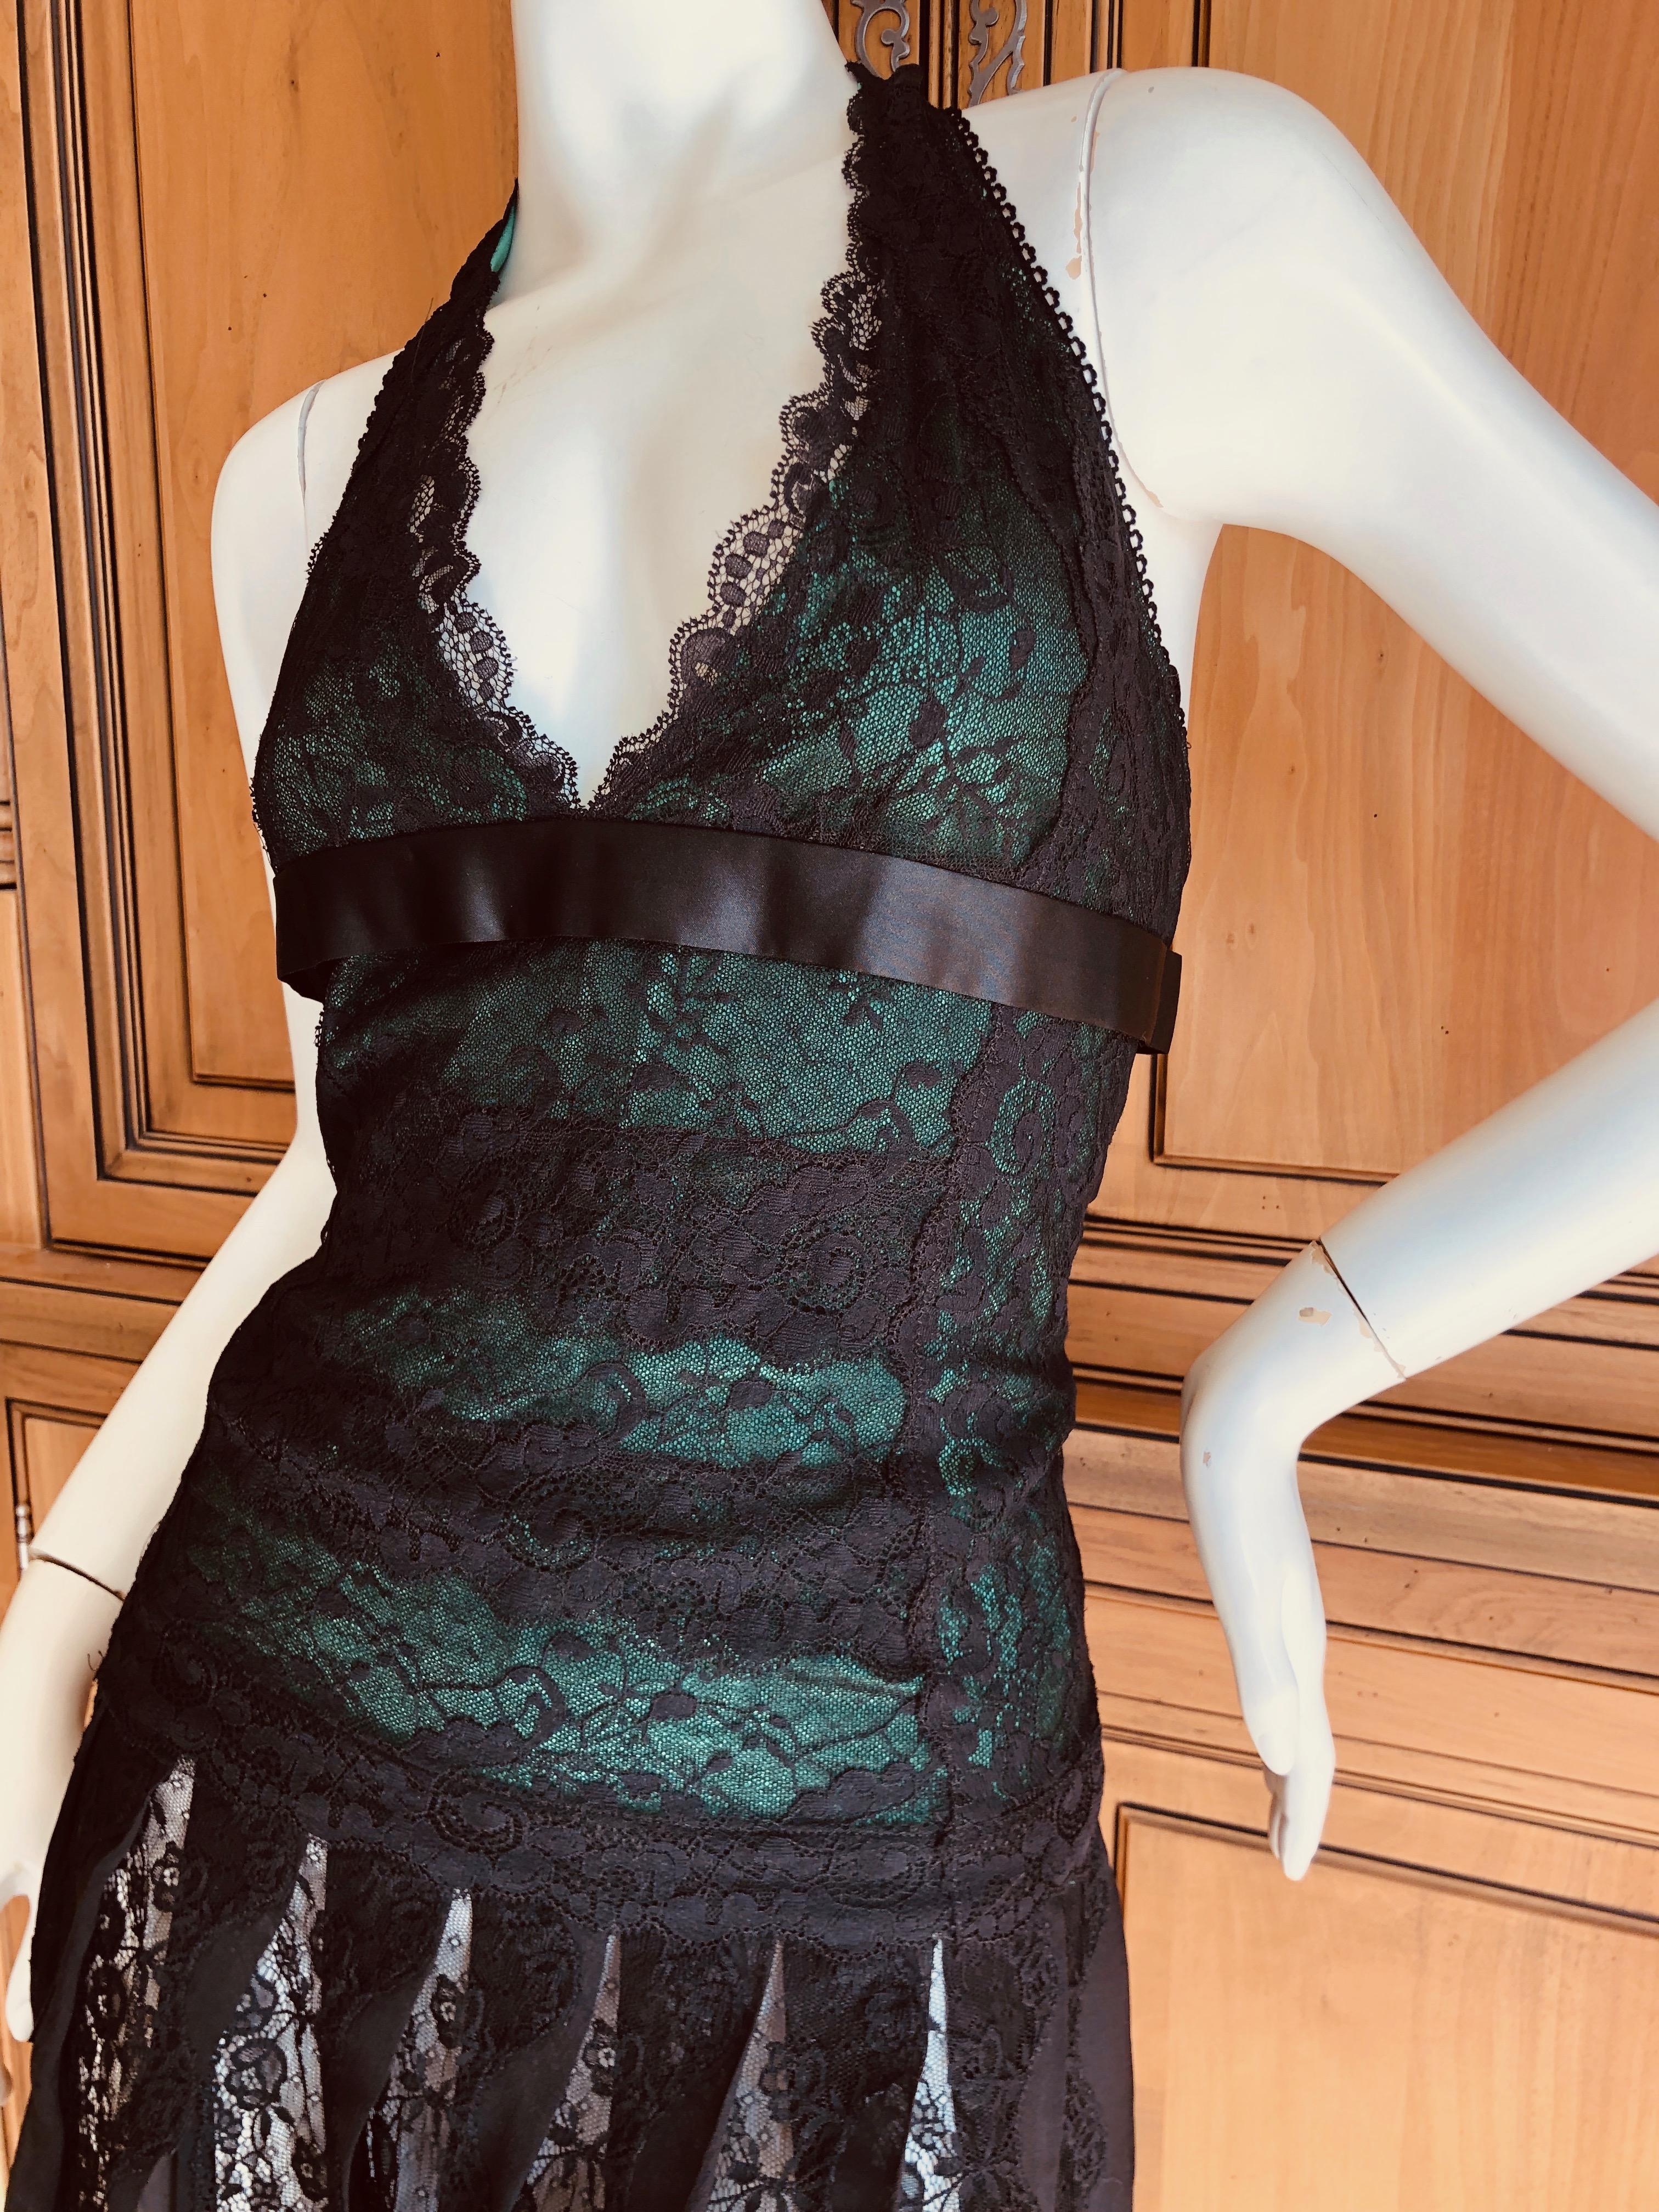 Dolce & Gabbana for D&G Vintage Sheer Black and Green Lace Cocktail Dress  In Excellent Condition For Sale In Cloverdale, CA